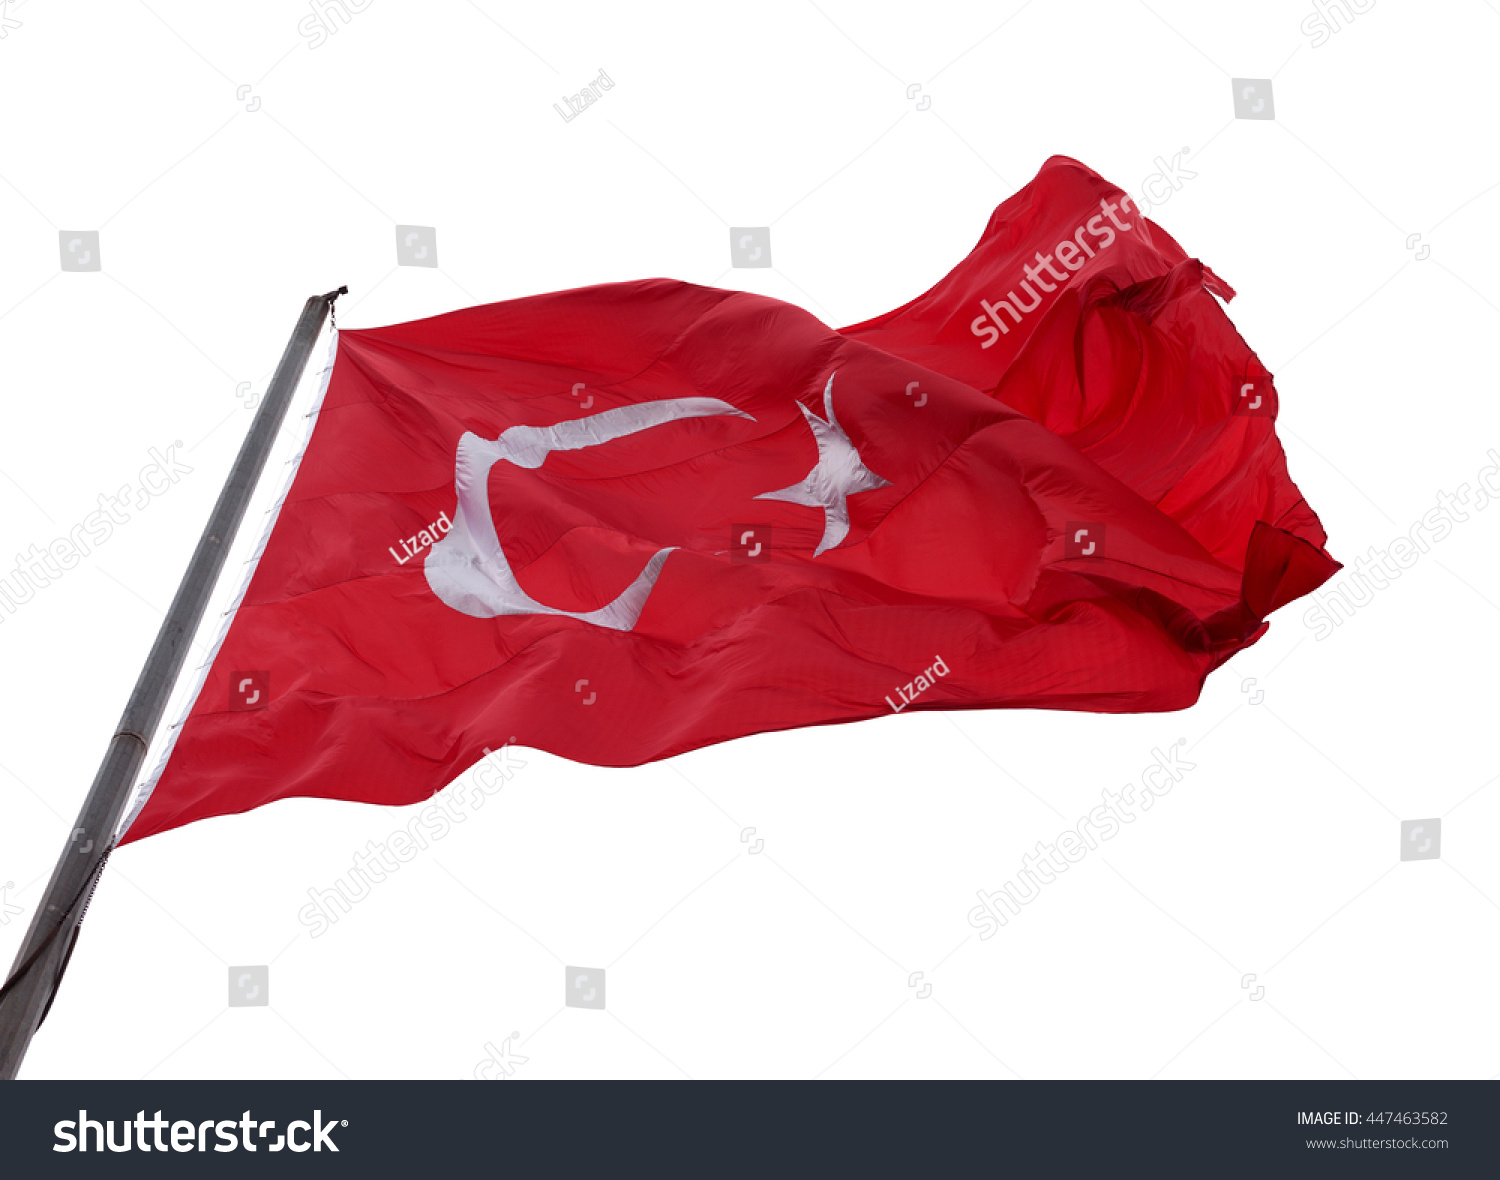 Turkish flag waving in wind. Isolated on white background. #447463582